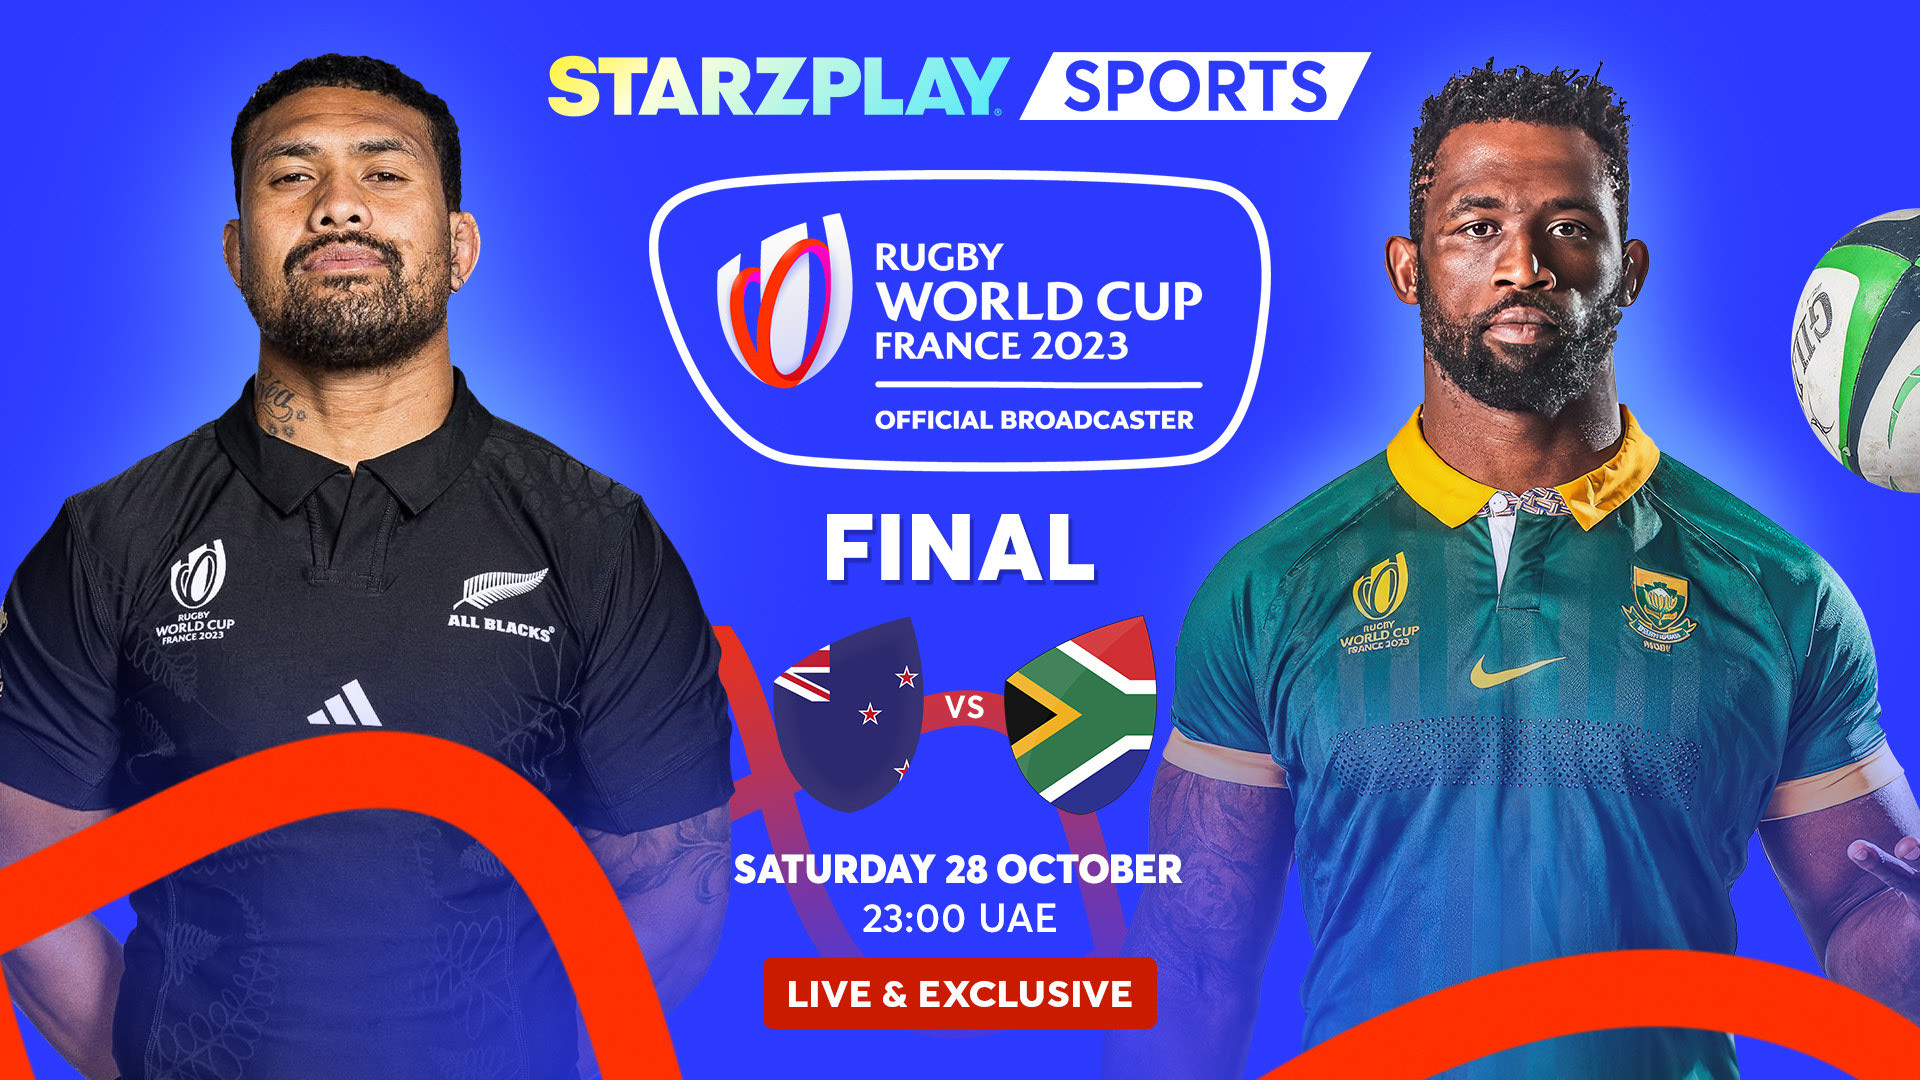 STARZPLAY To Stream The Rugby World Cup 2023 Final Between New Zealand And South Africa